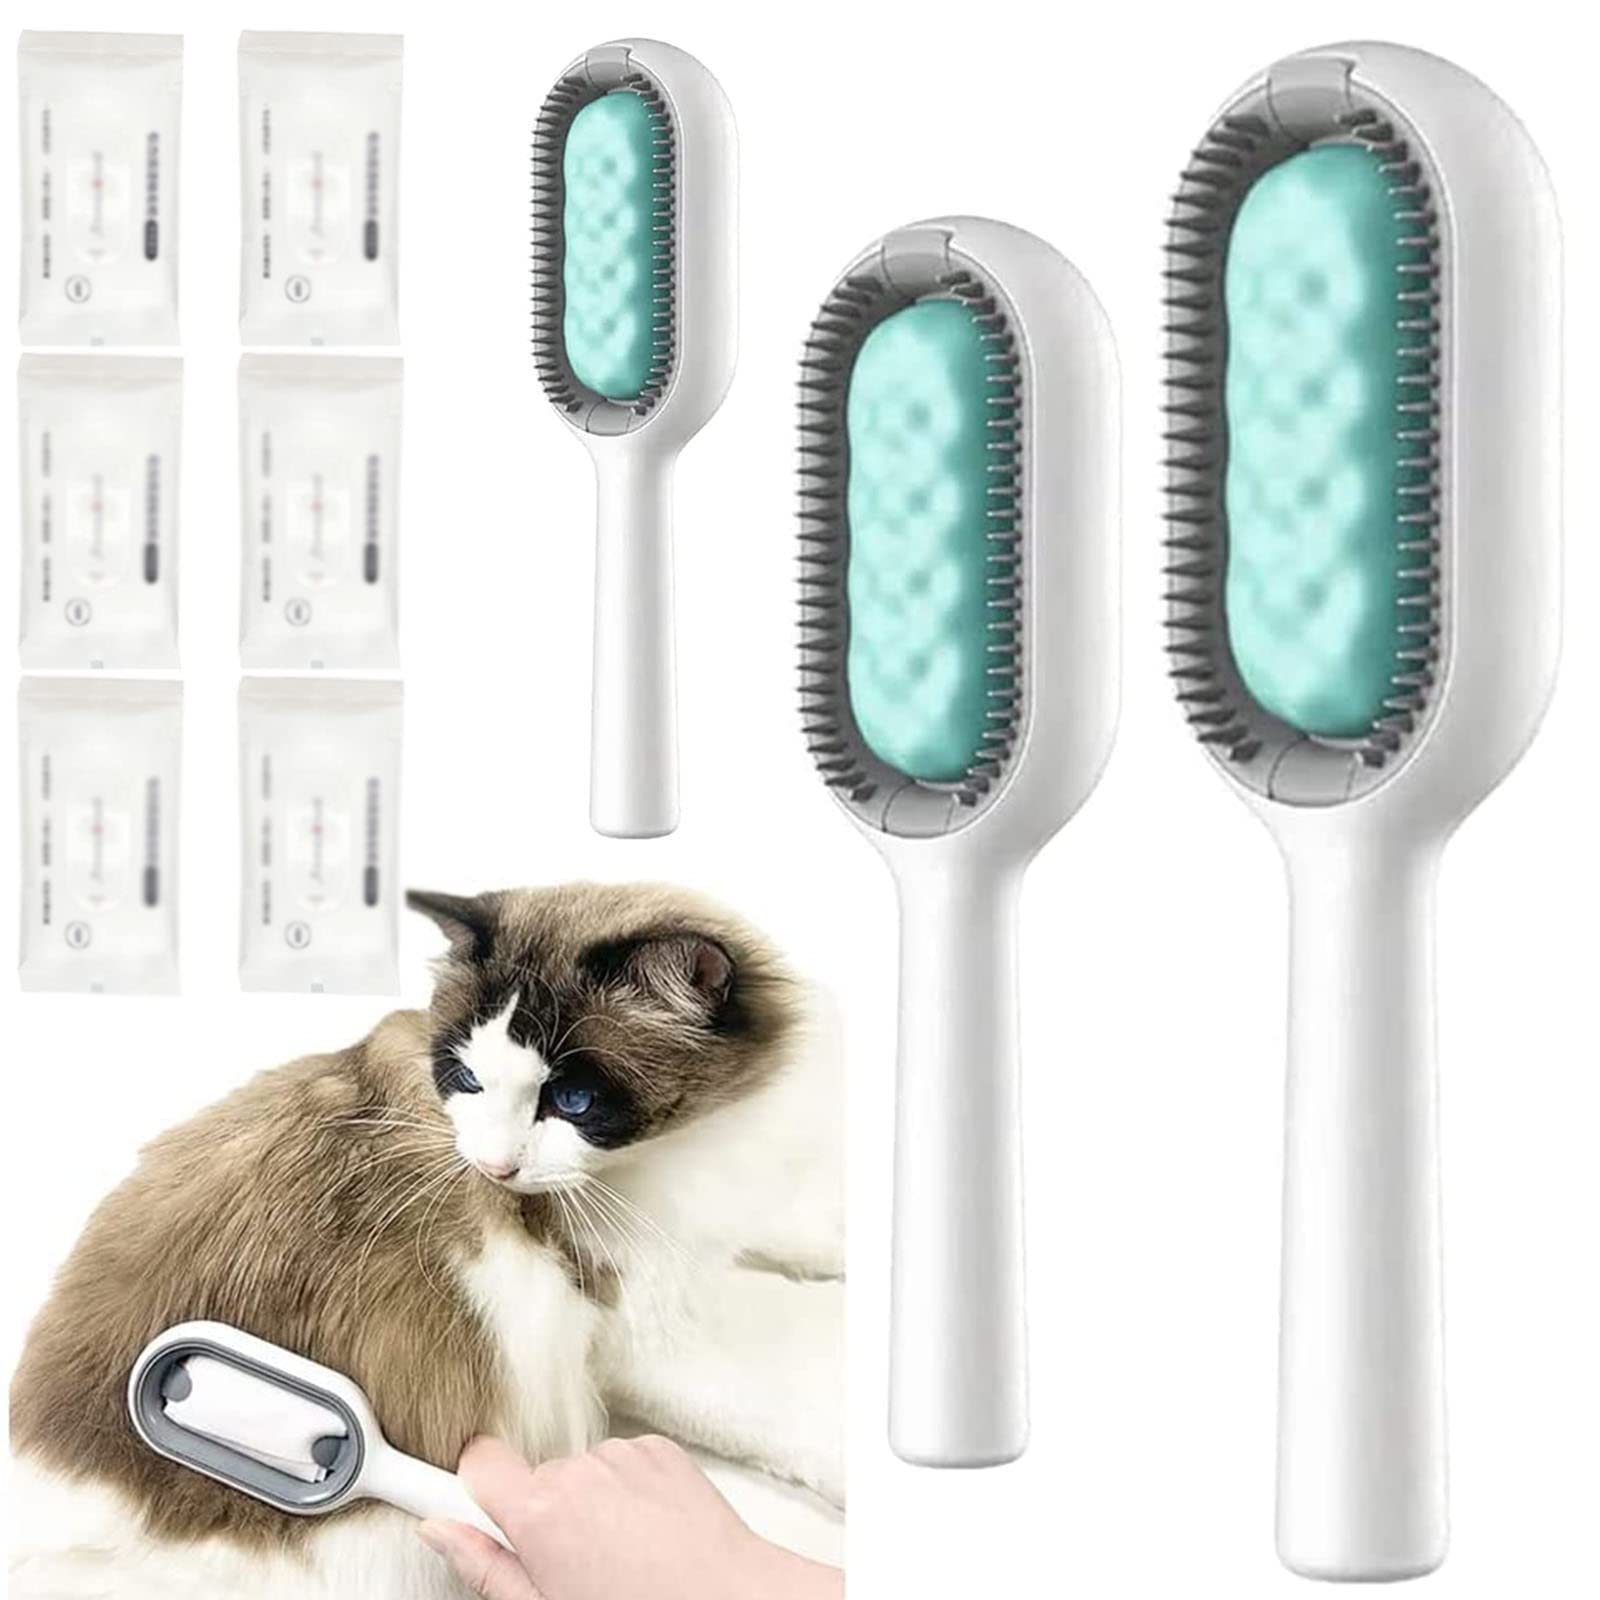 Knot Remover for Pets, Pet Cleaning Hair Removal Comb, Massage for Removing Loose Undercoat, Pet Hair Remover for Long and Short Haired Dogs and Cats,Green shorthair,3pcs